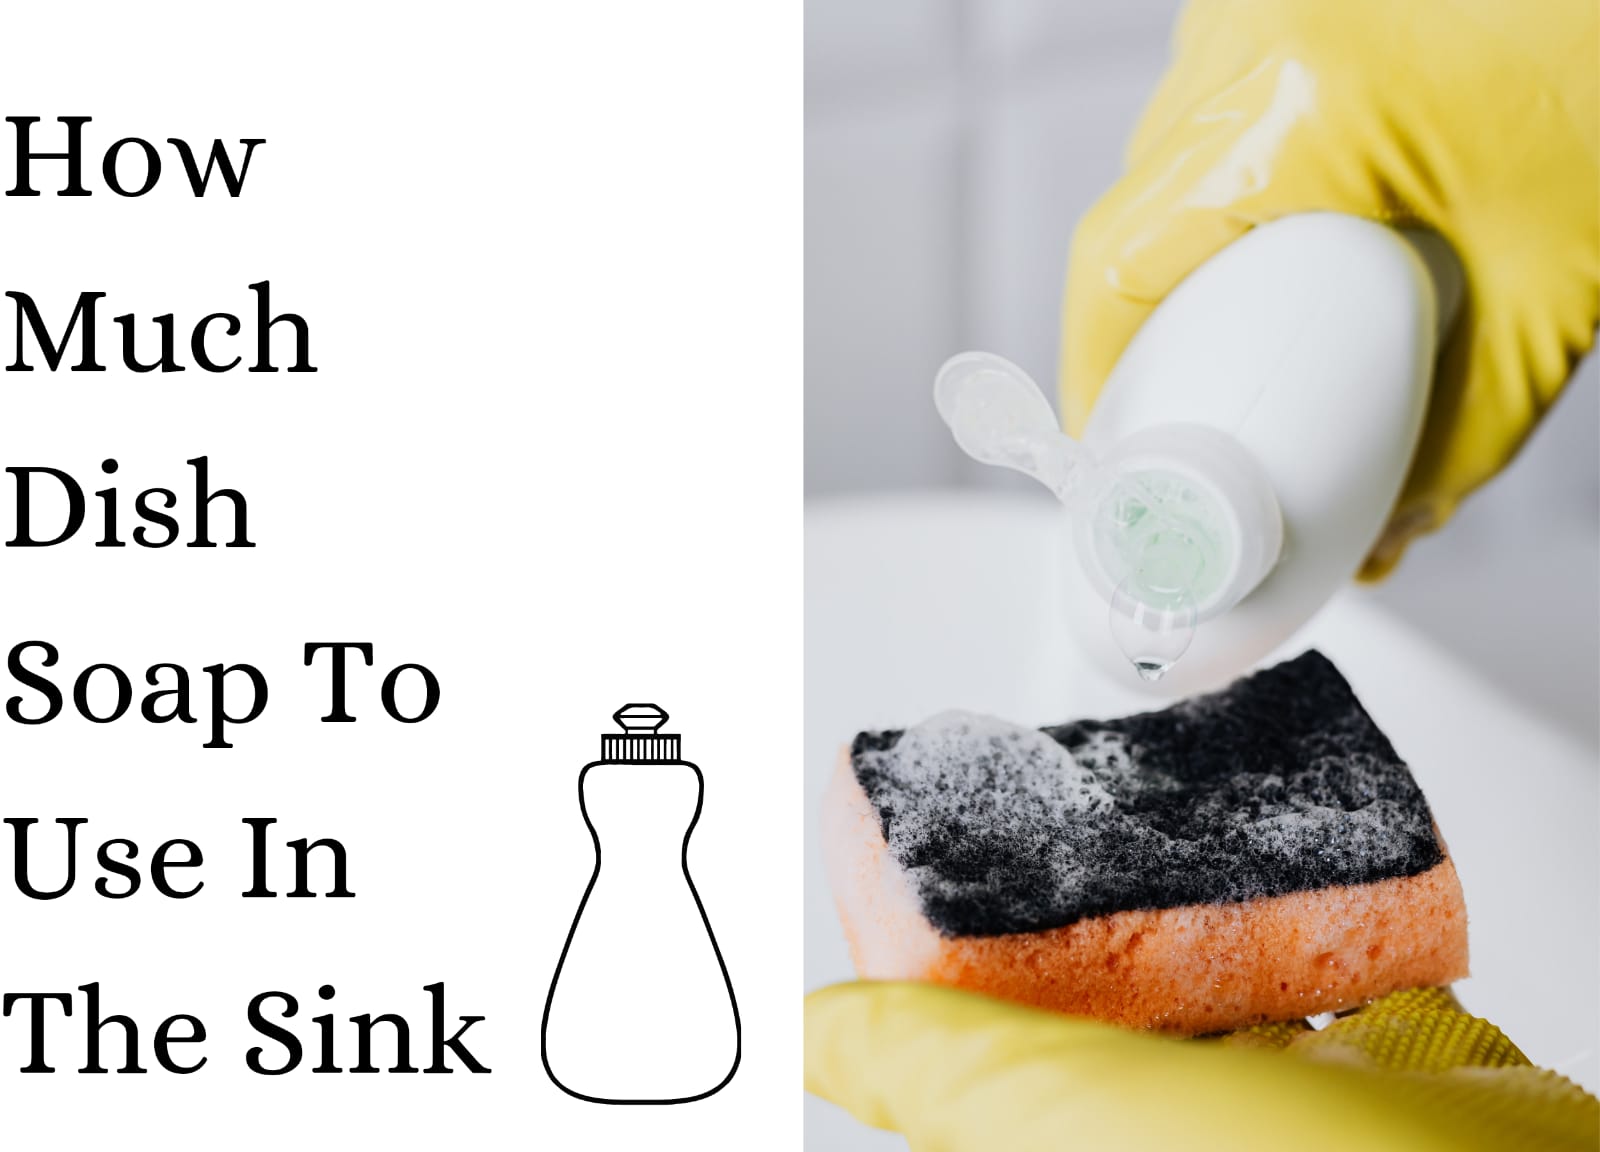 How Much Dish Soap To Use In The Sink?